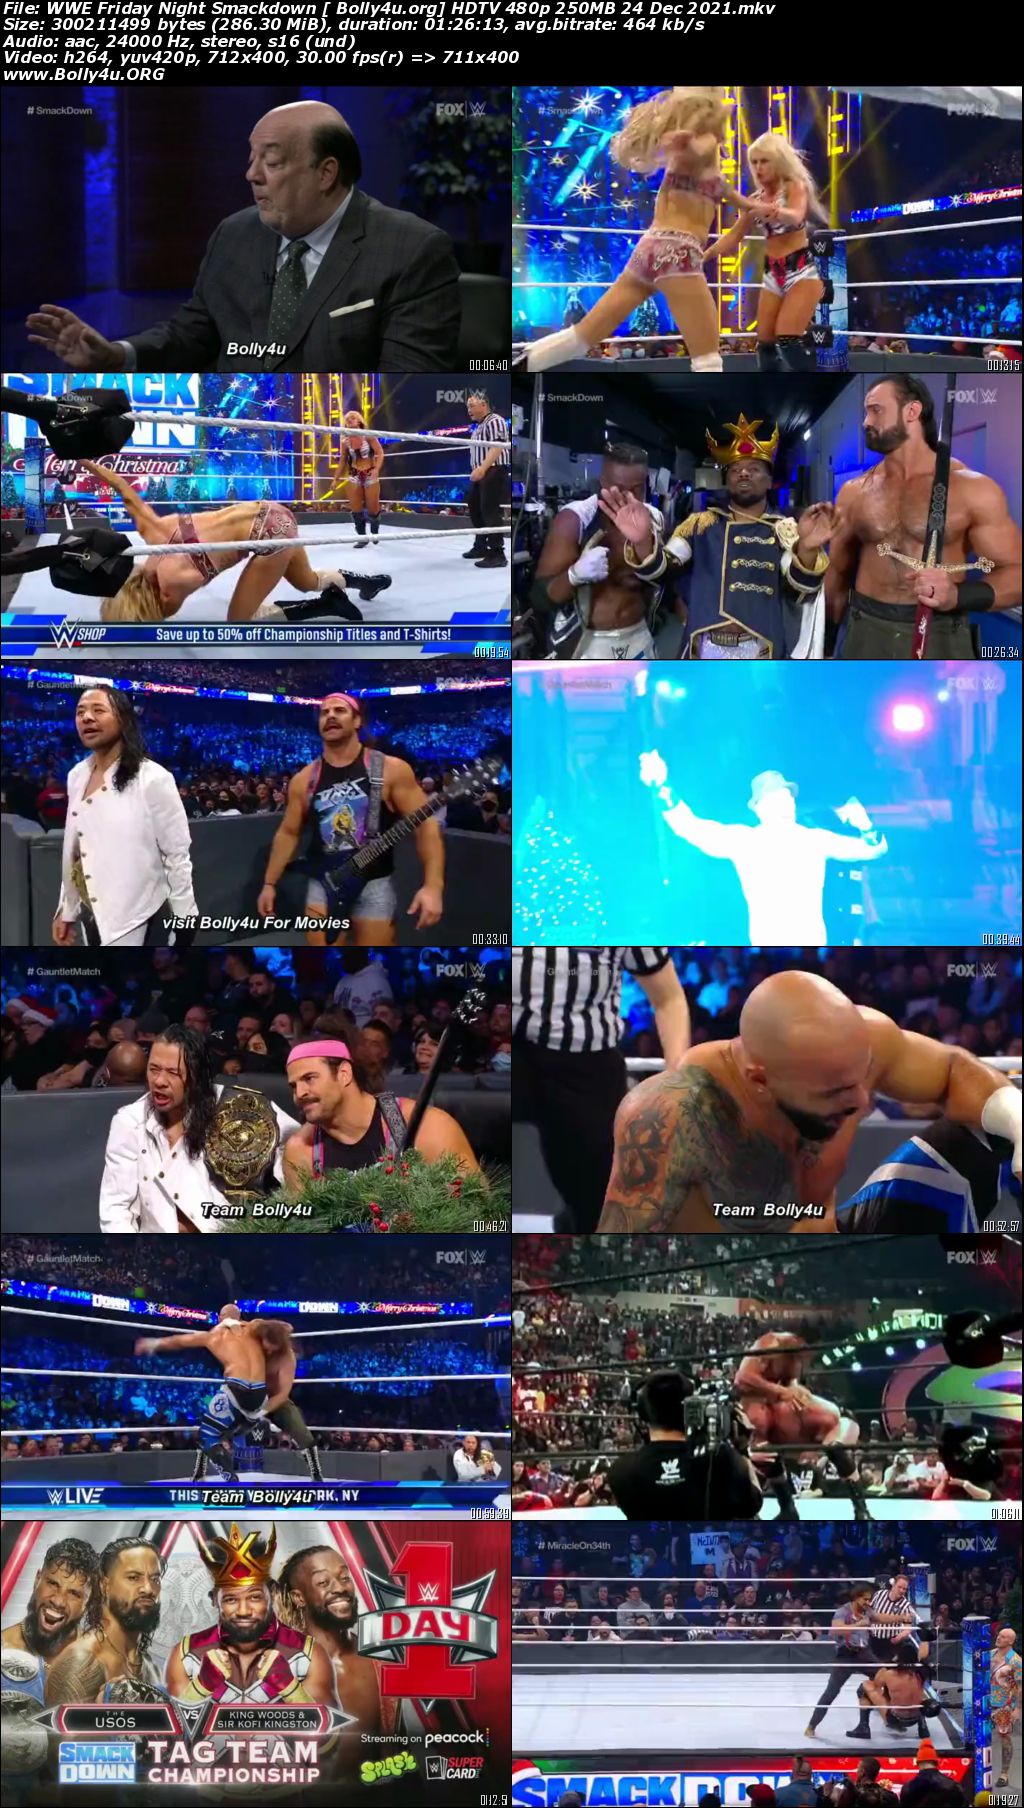 WWE Friday Night Smackdown HDTV 480p 250MB 24 Dec 2021 Download